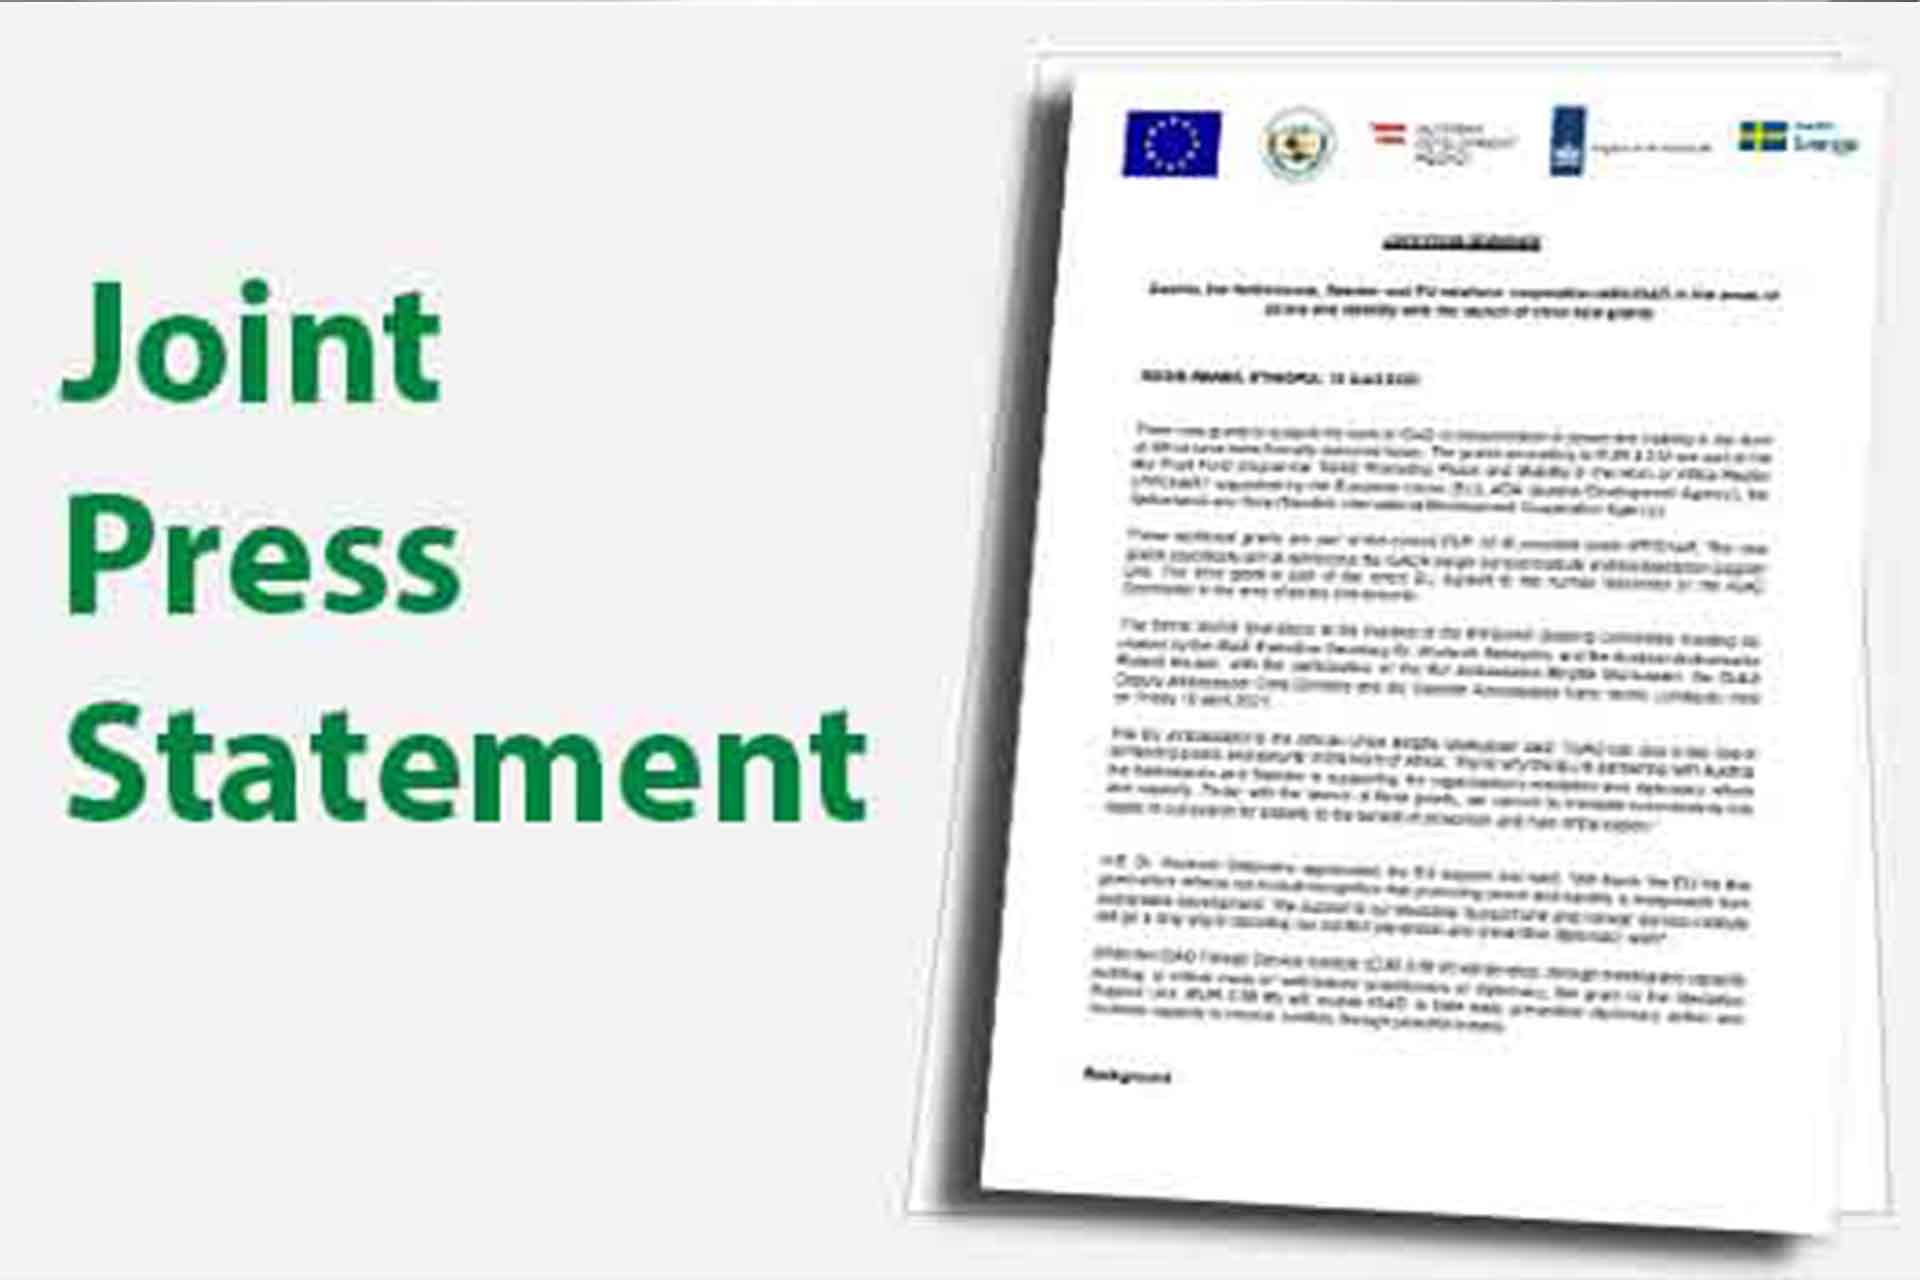 Austria, The Netherlands, Sweden And EU Reinforce Cooperation With IGAD In The Areas Of Peace And Stability With The Launch Of Three New Grants